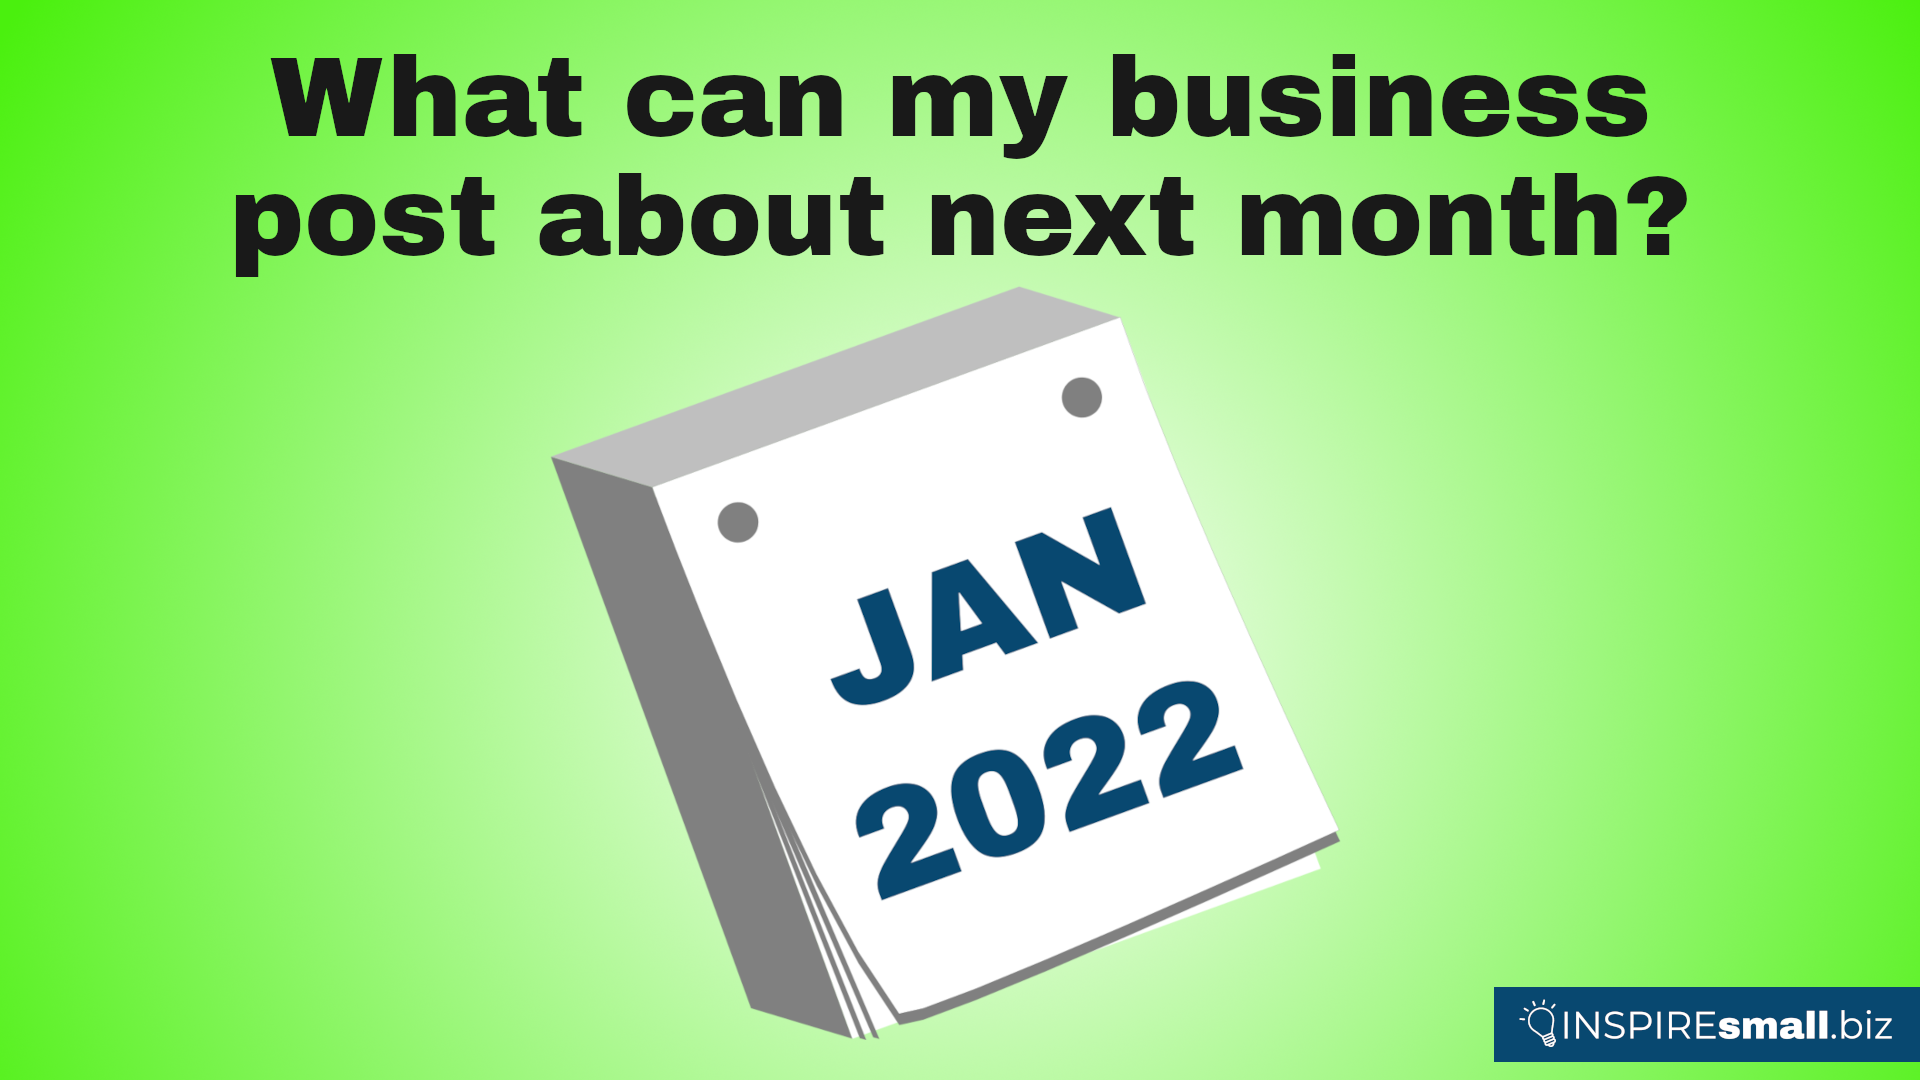 What can my business post about next month? January 2022. Blog from INSPIREsmall.biz